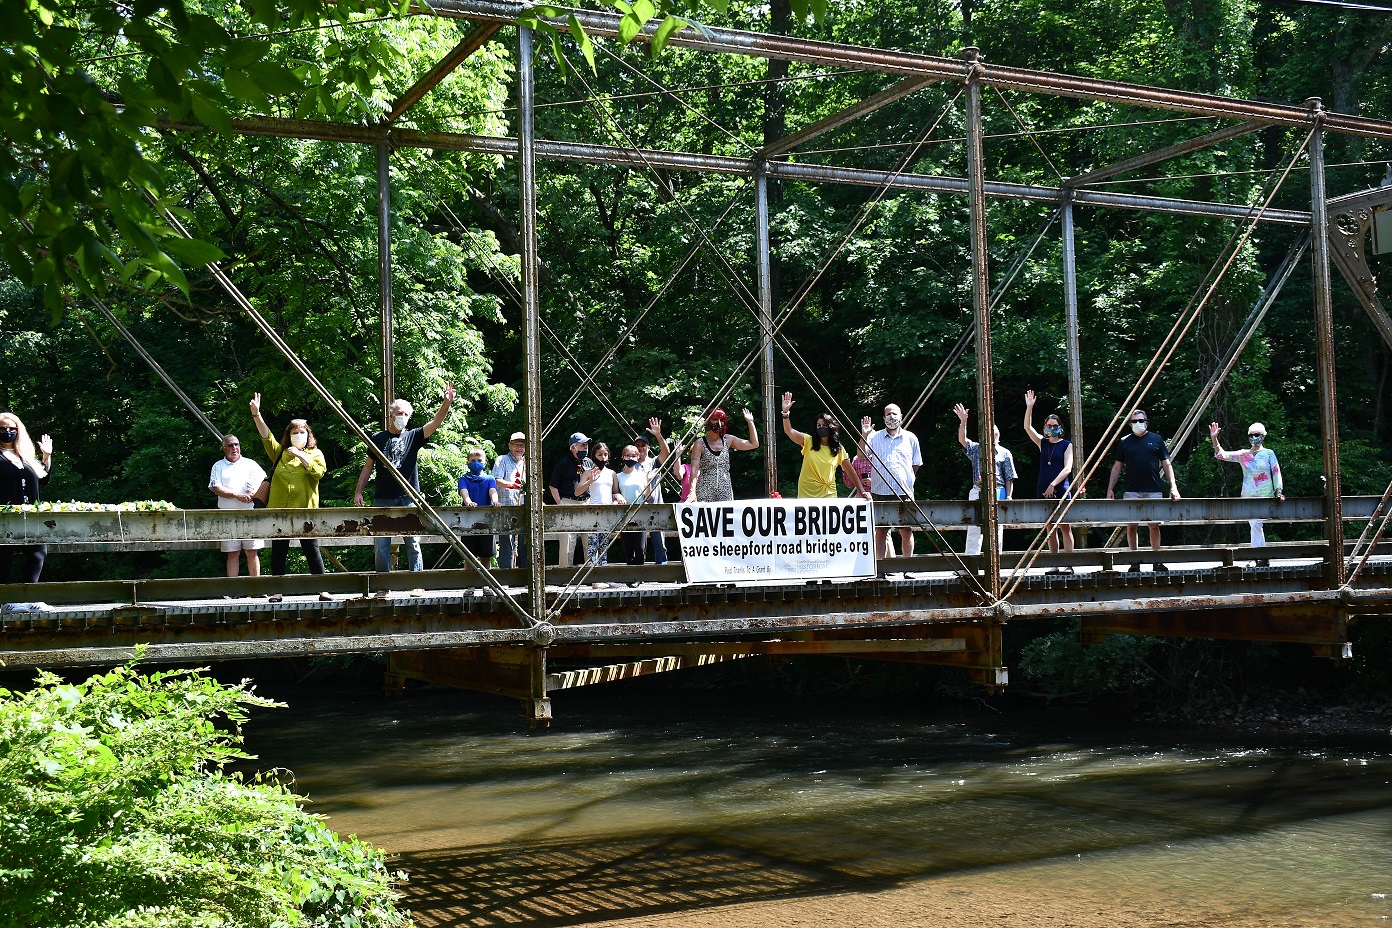 Group of people standing on a metal bridge over water.